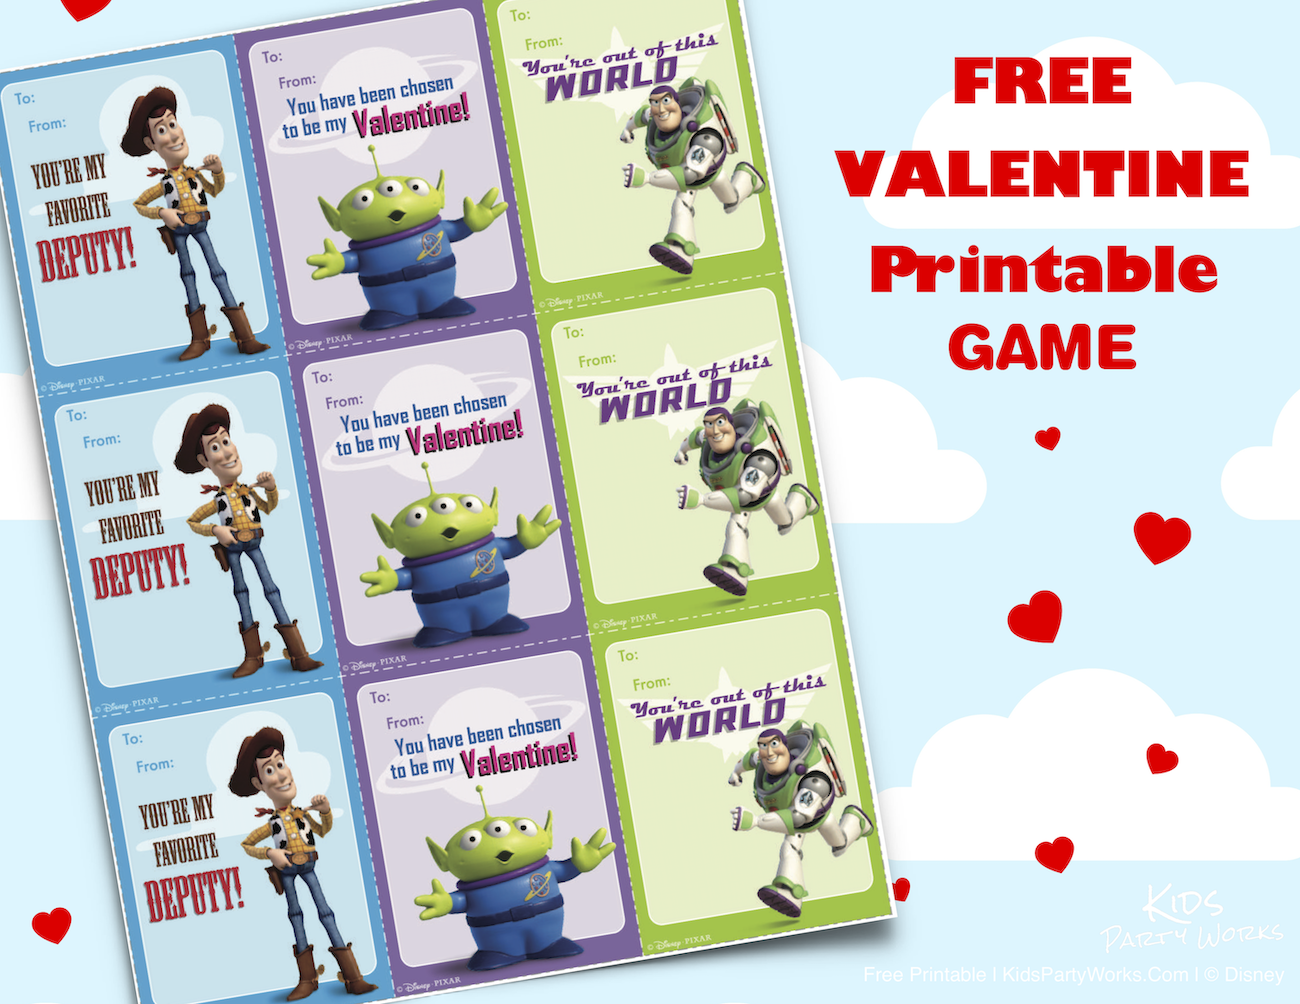 Toy Story Printable Valentines Cards. KidsPartyWorks.Com